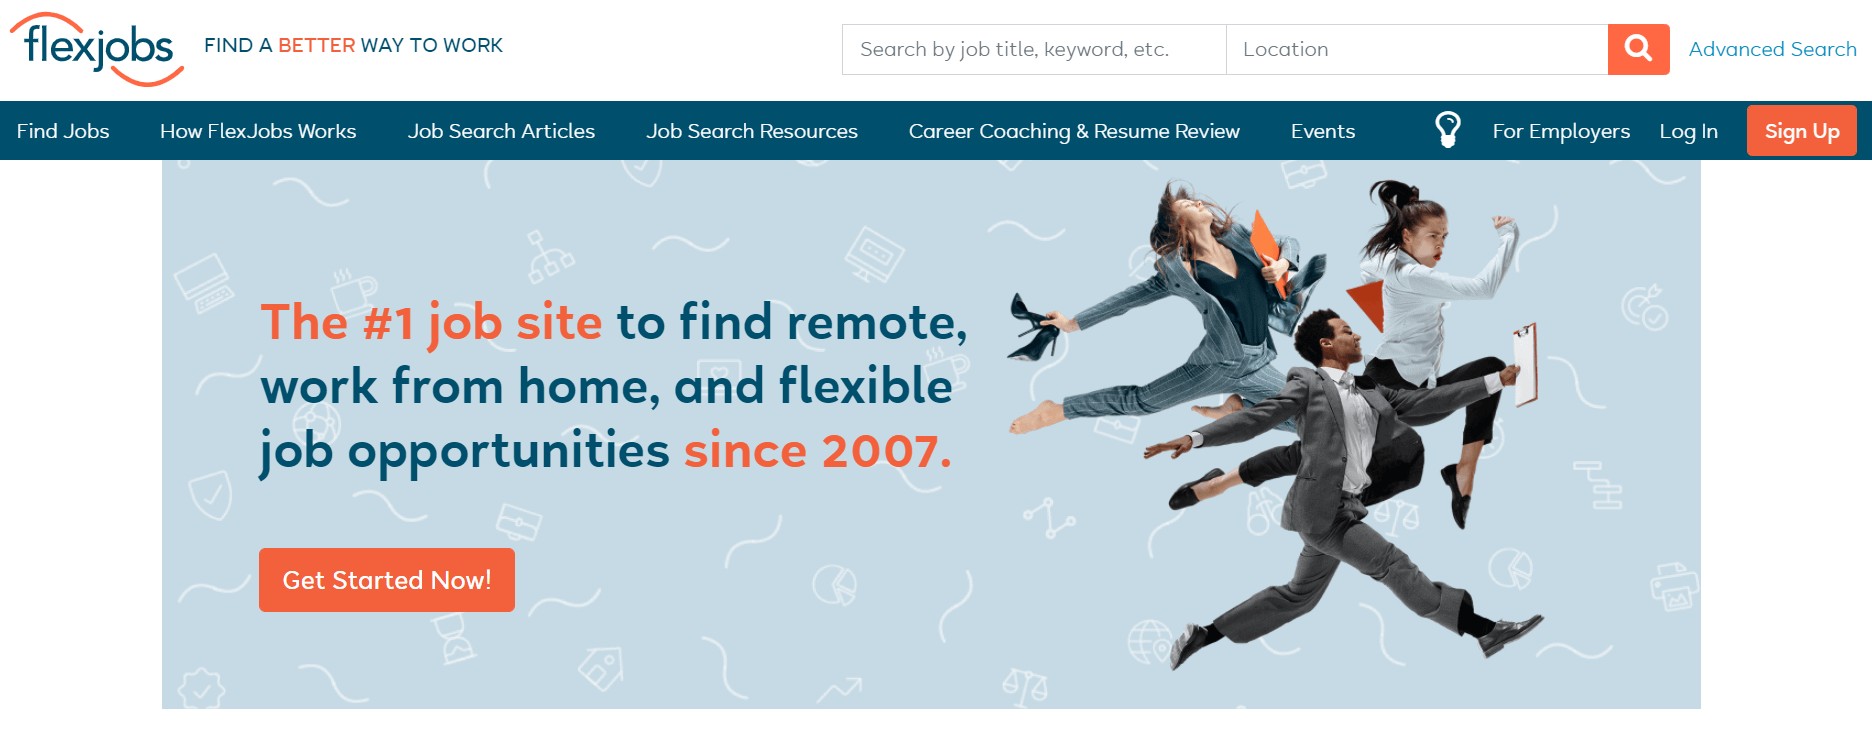 The Flexjobs home page.